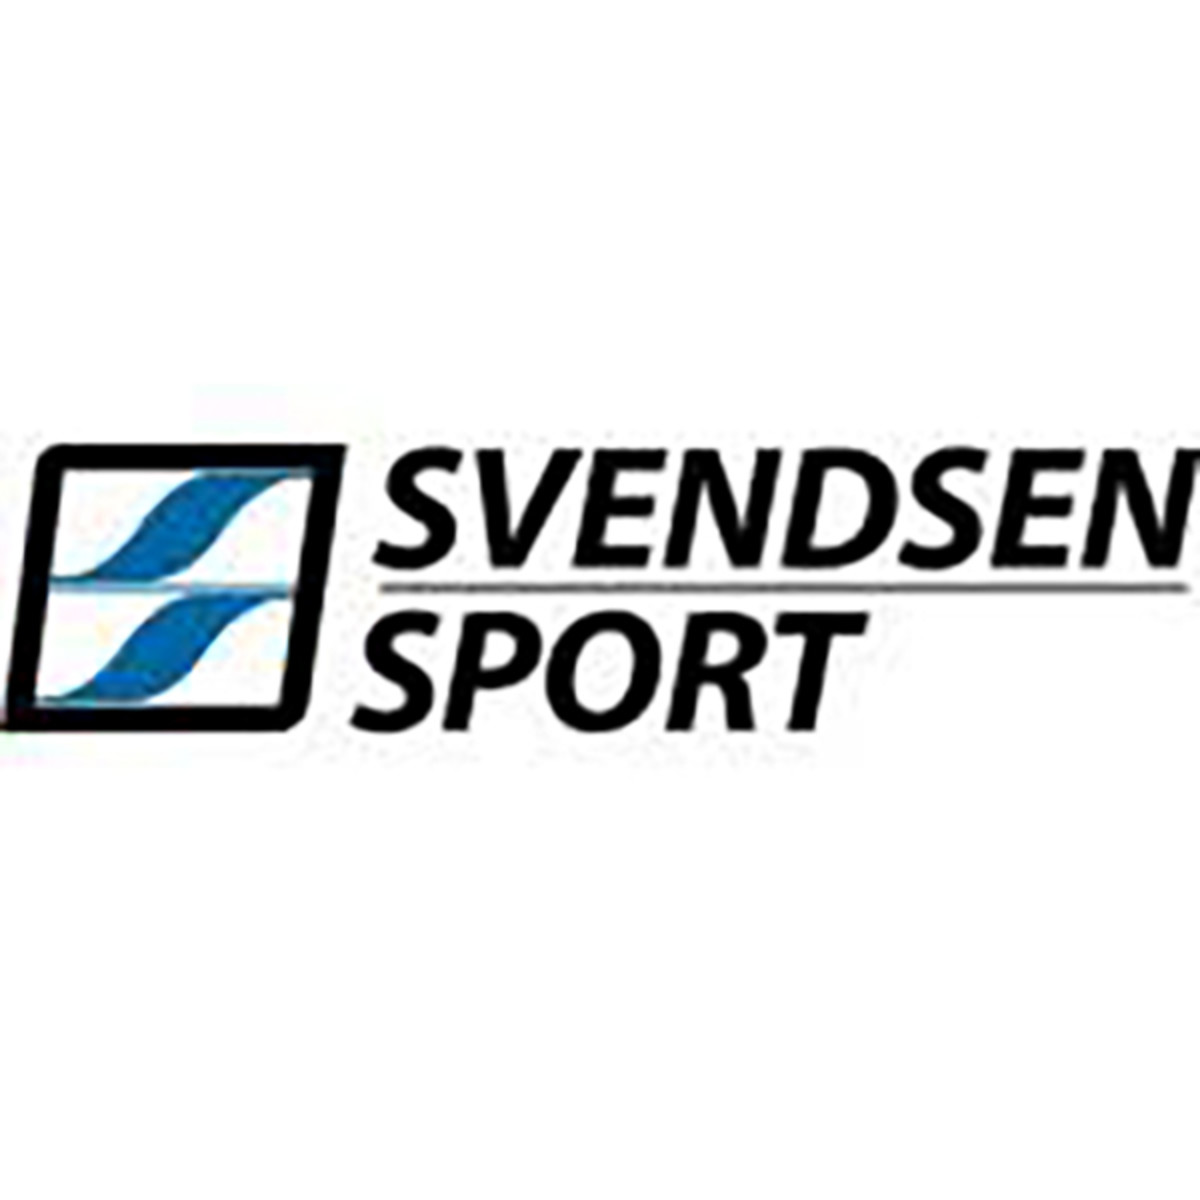 Pure Fishing Acquires Svendsen Sport - Trade Only Today